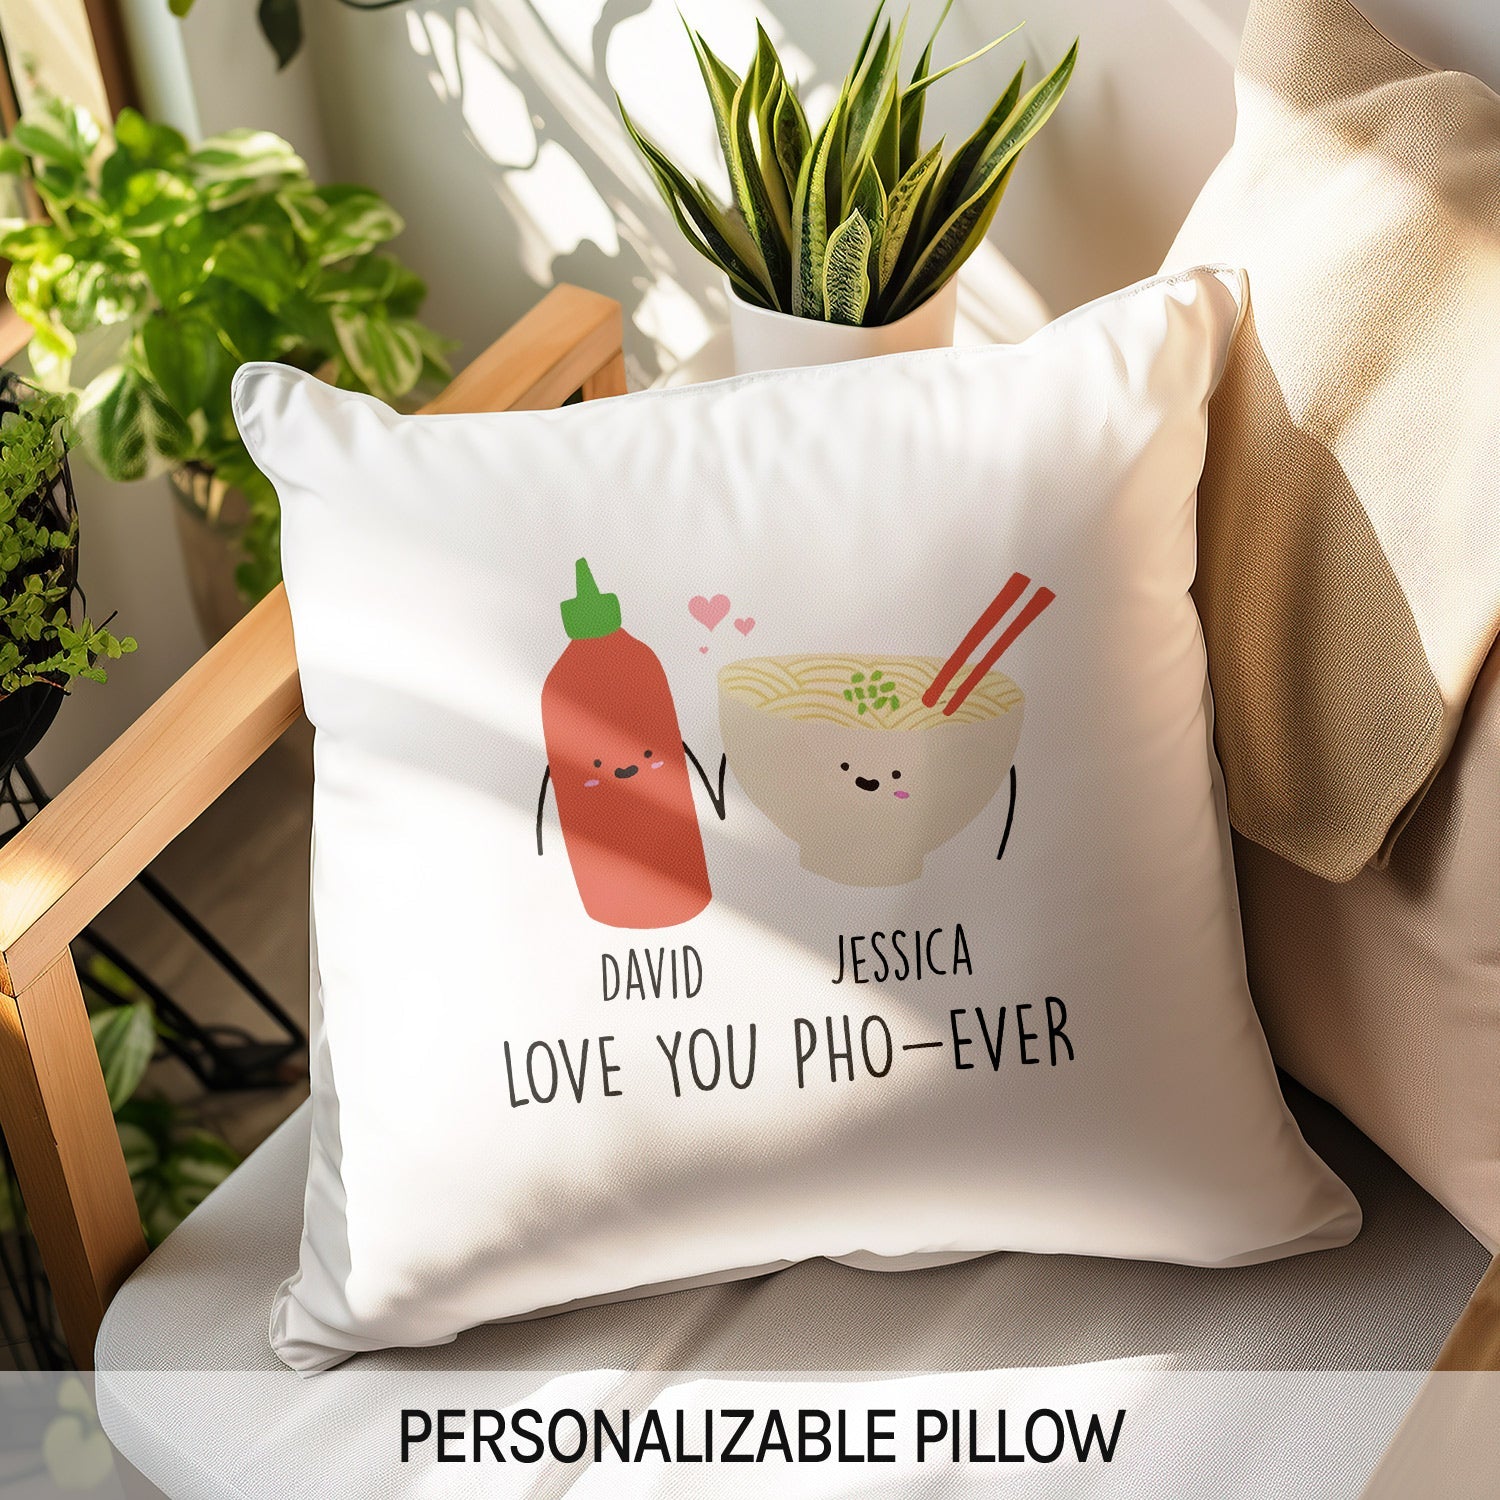 Love You Pho-ever - Personalized Anniversary or Valentine's Day gift for Husband or Wife - Custom Pillow - MyMindfulGifts